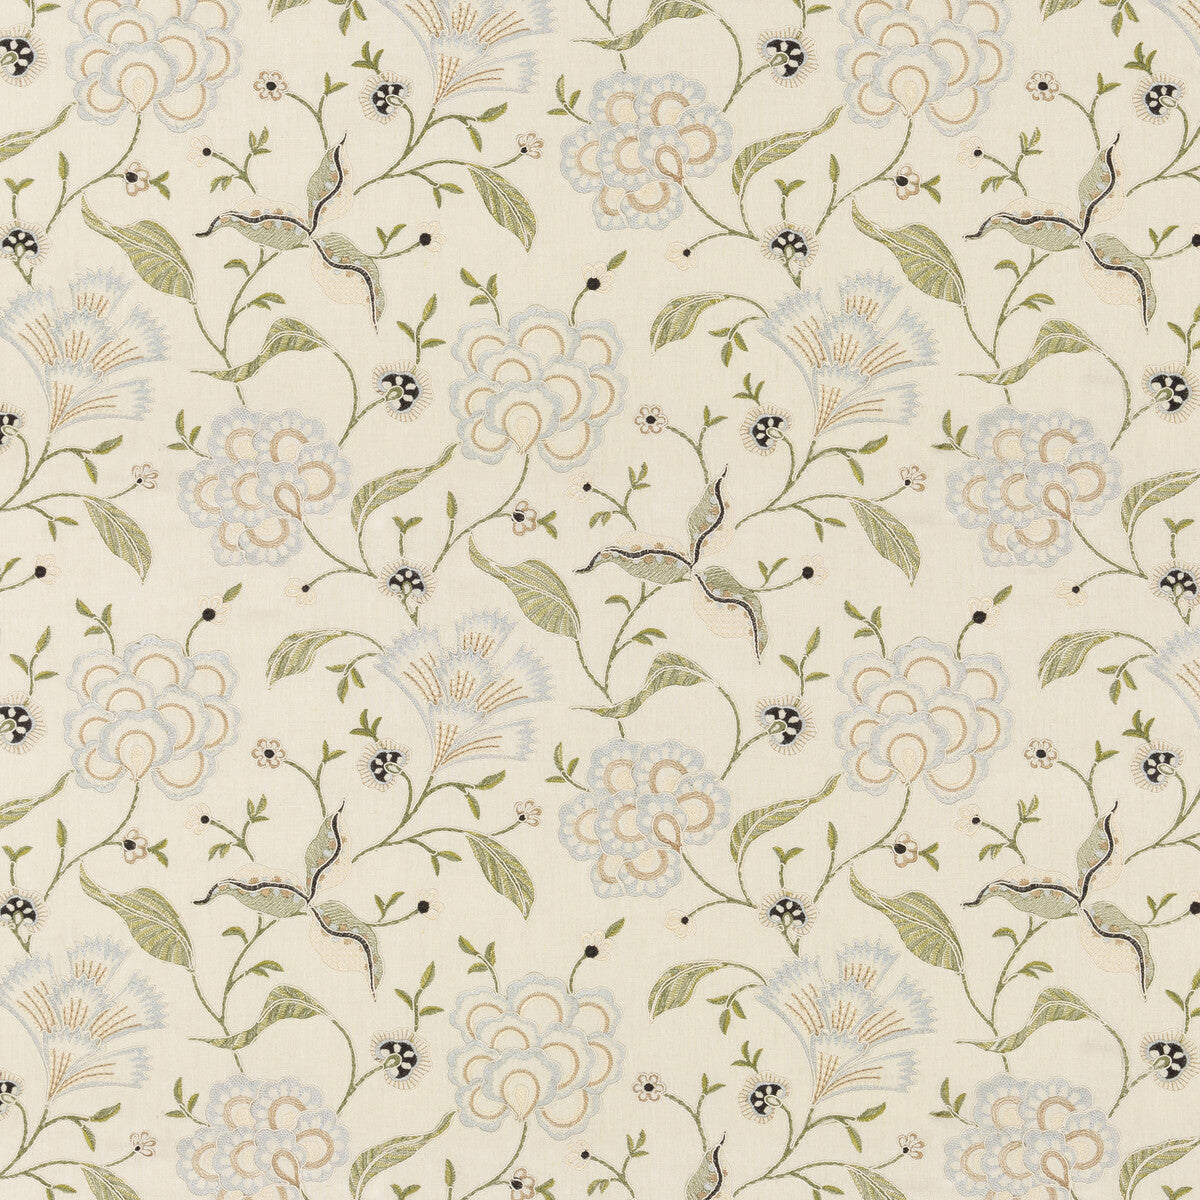 Lamorna Embroidery fabric in linen color - pattern BF10798.1.0 - by G P &amp; J Baker in the Artisan II collection